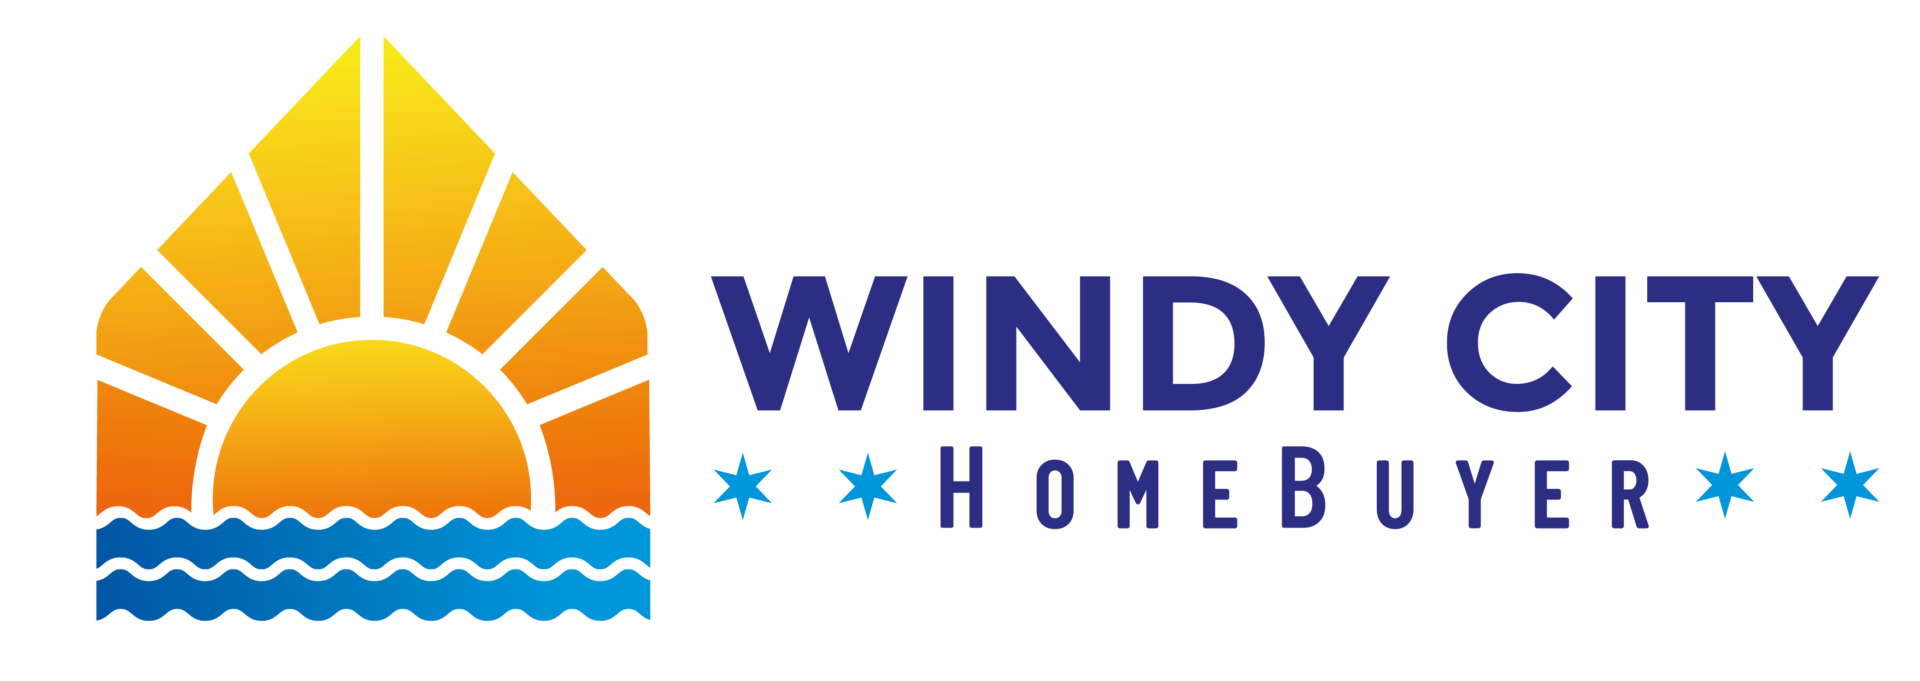 Windy City HomeBuyer – We Buy Houses Fast for Cash! logo